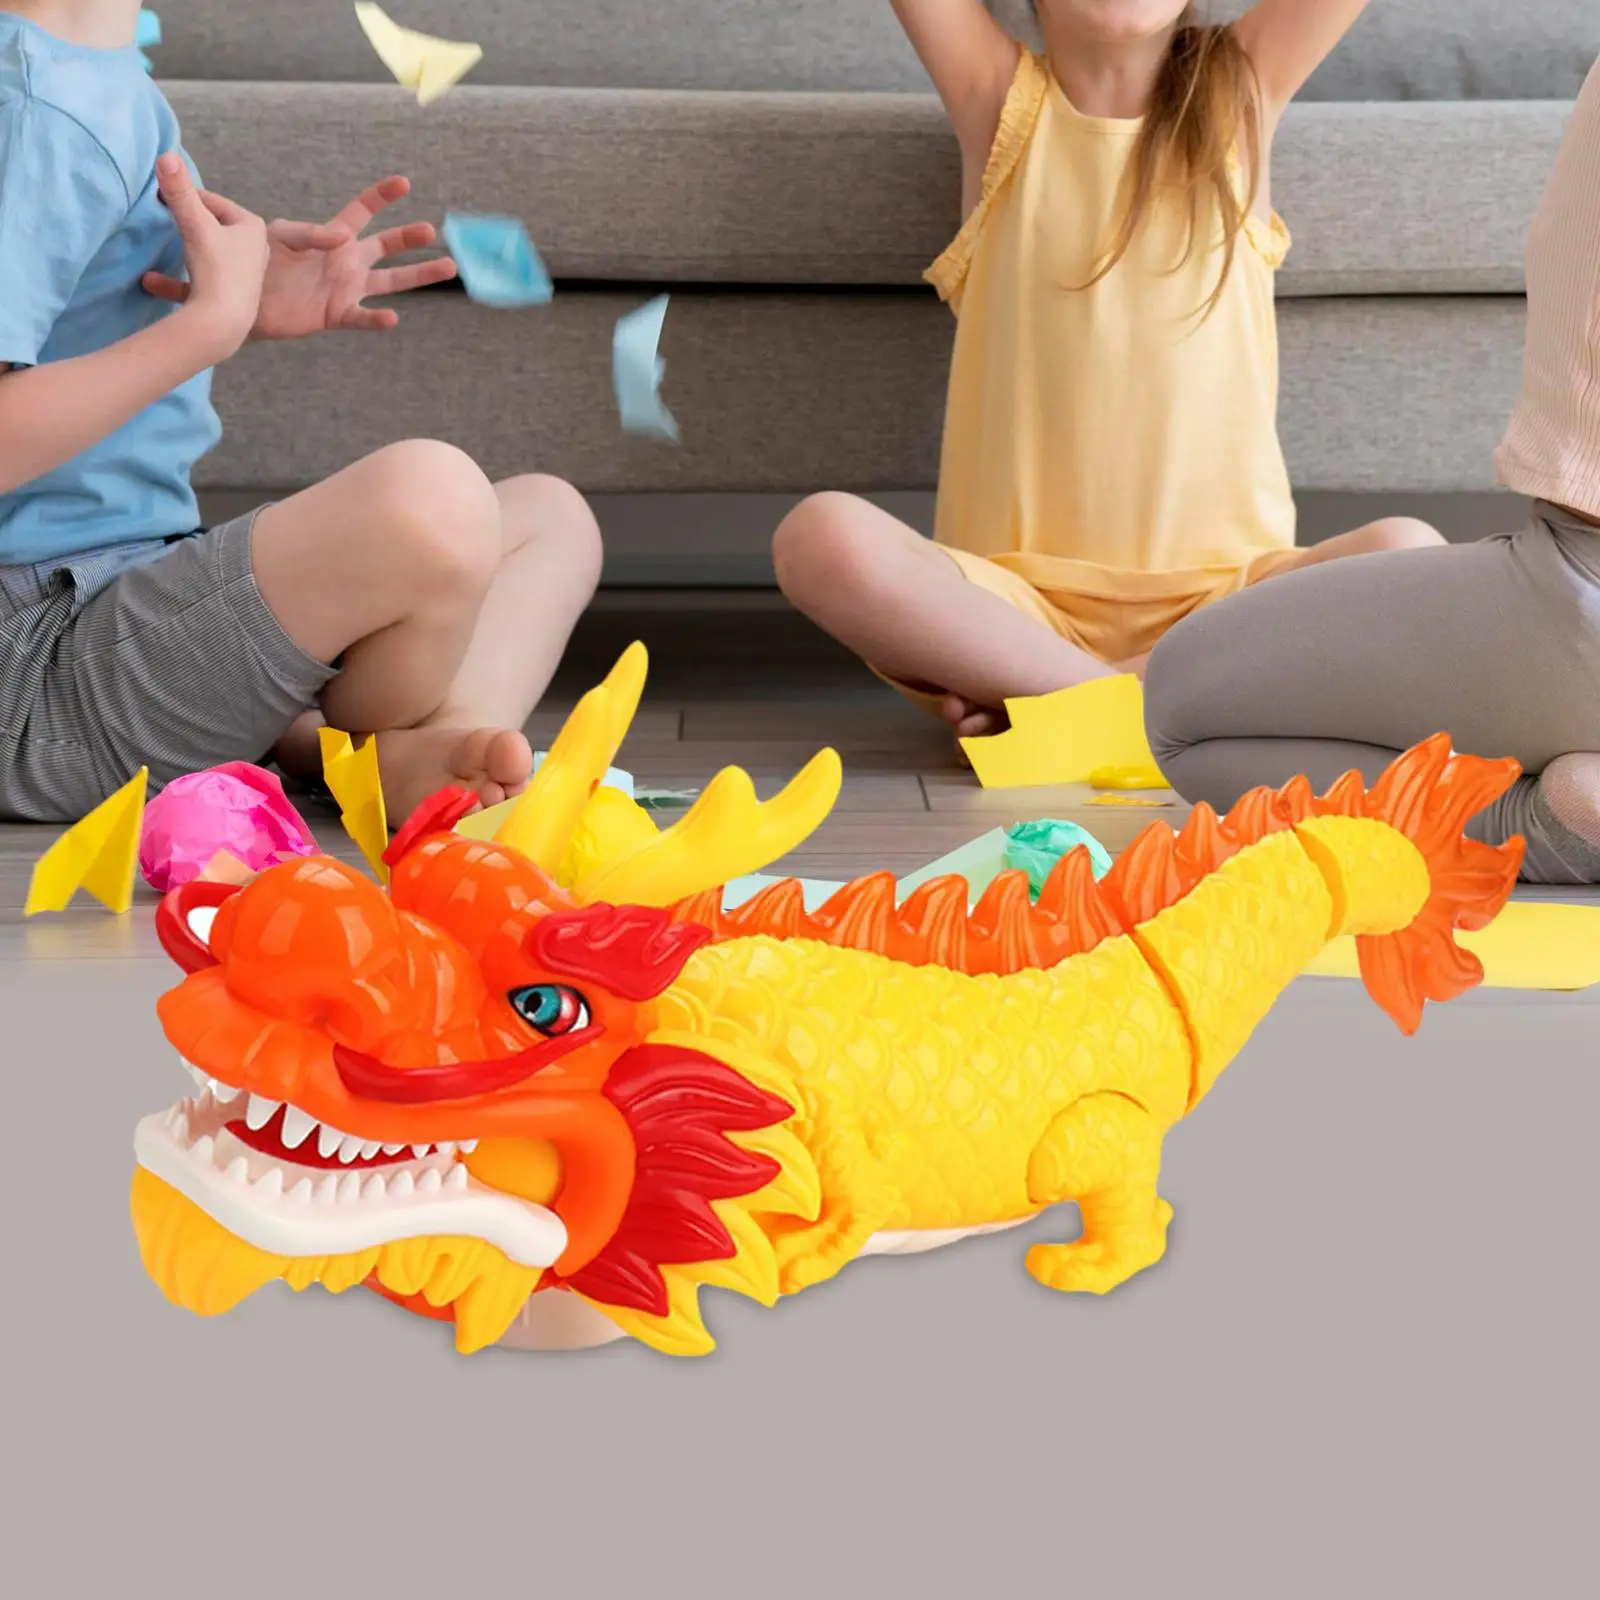 Eletric Dragon Toy Educational Learning Outdoor Bathroom Novelty Birthday Gifts Realistic Infant Toy for Age 8-12 Children Girls